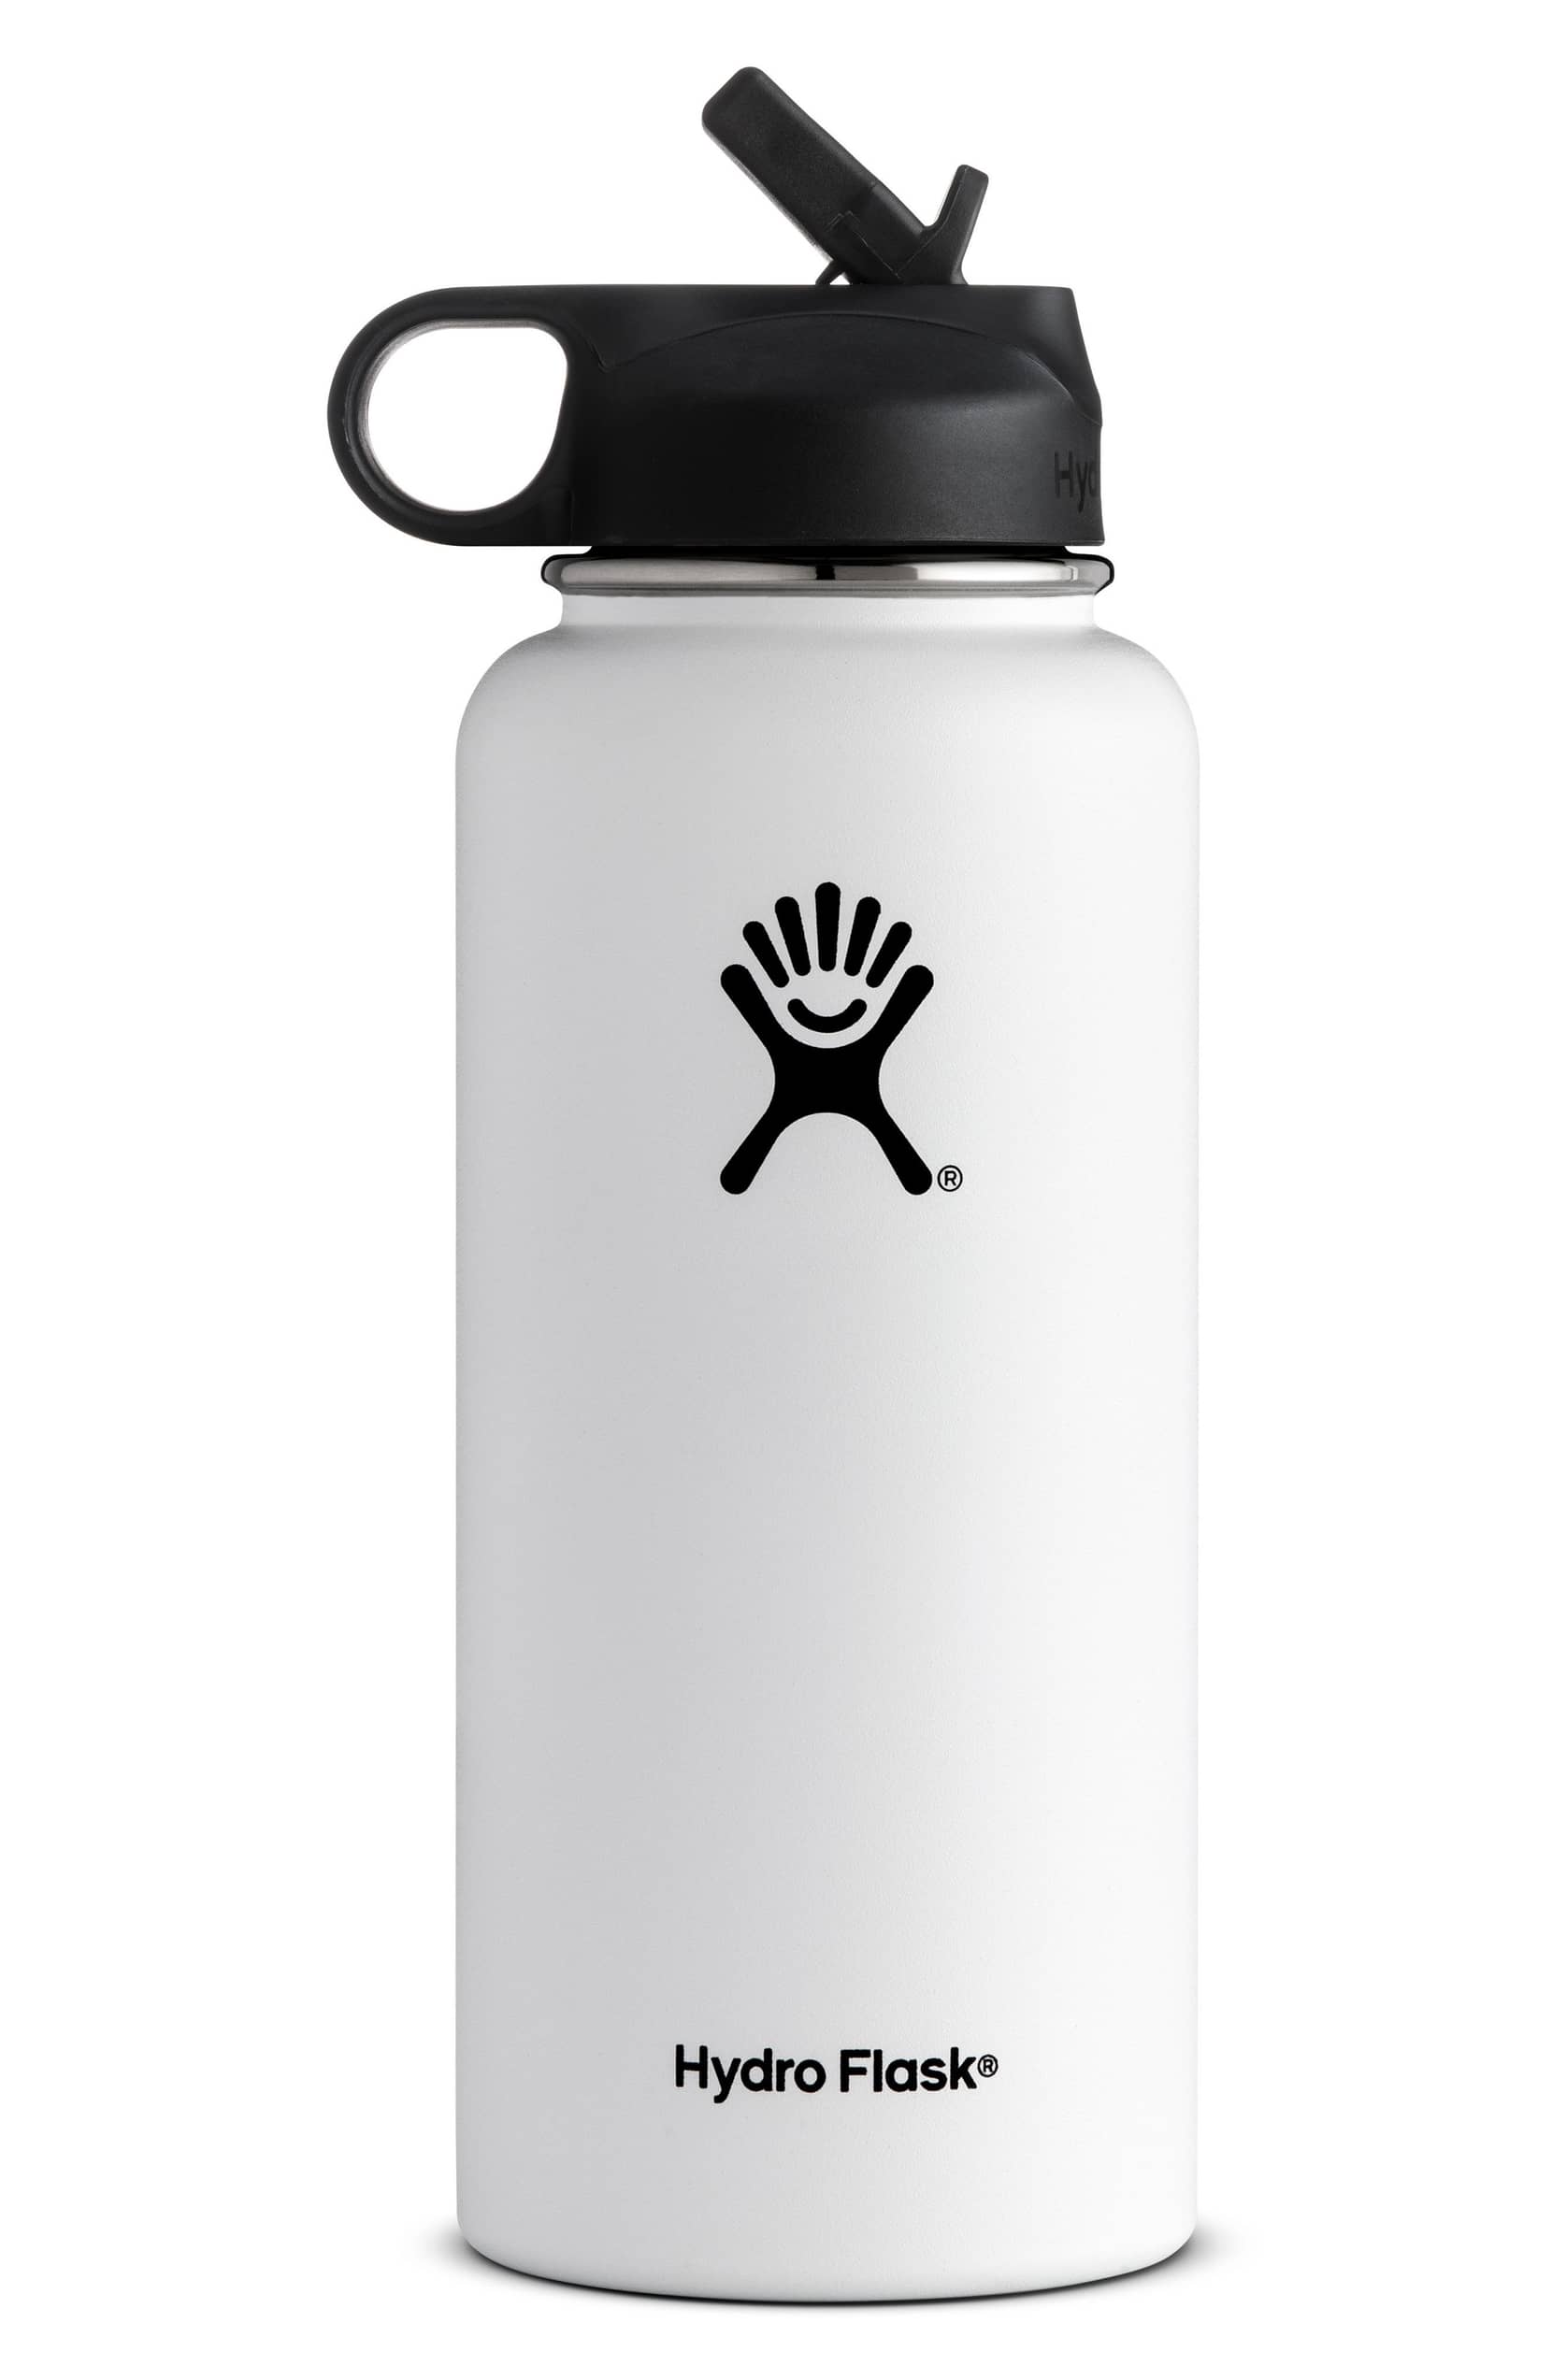 Hydro Flask, the best reusable water bottle 